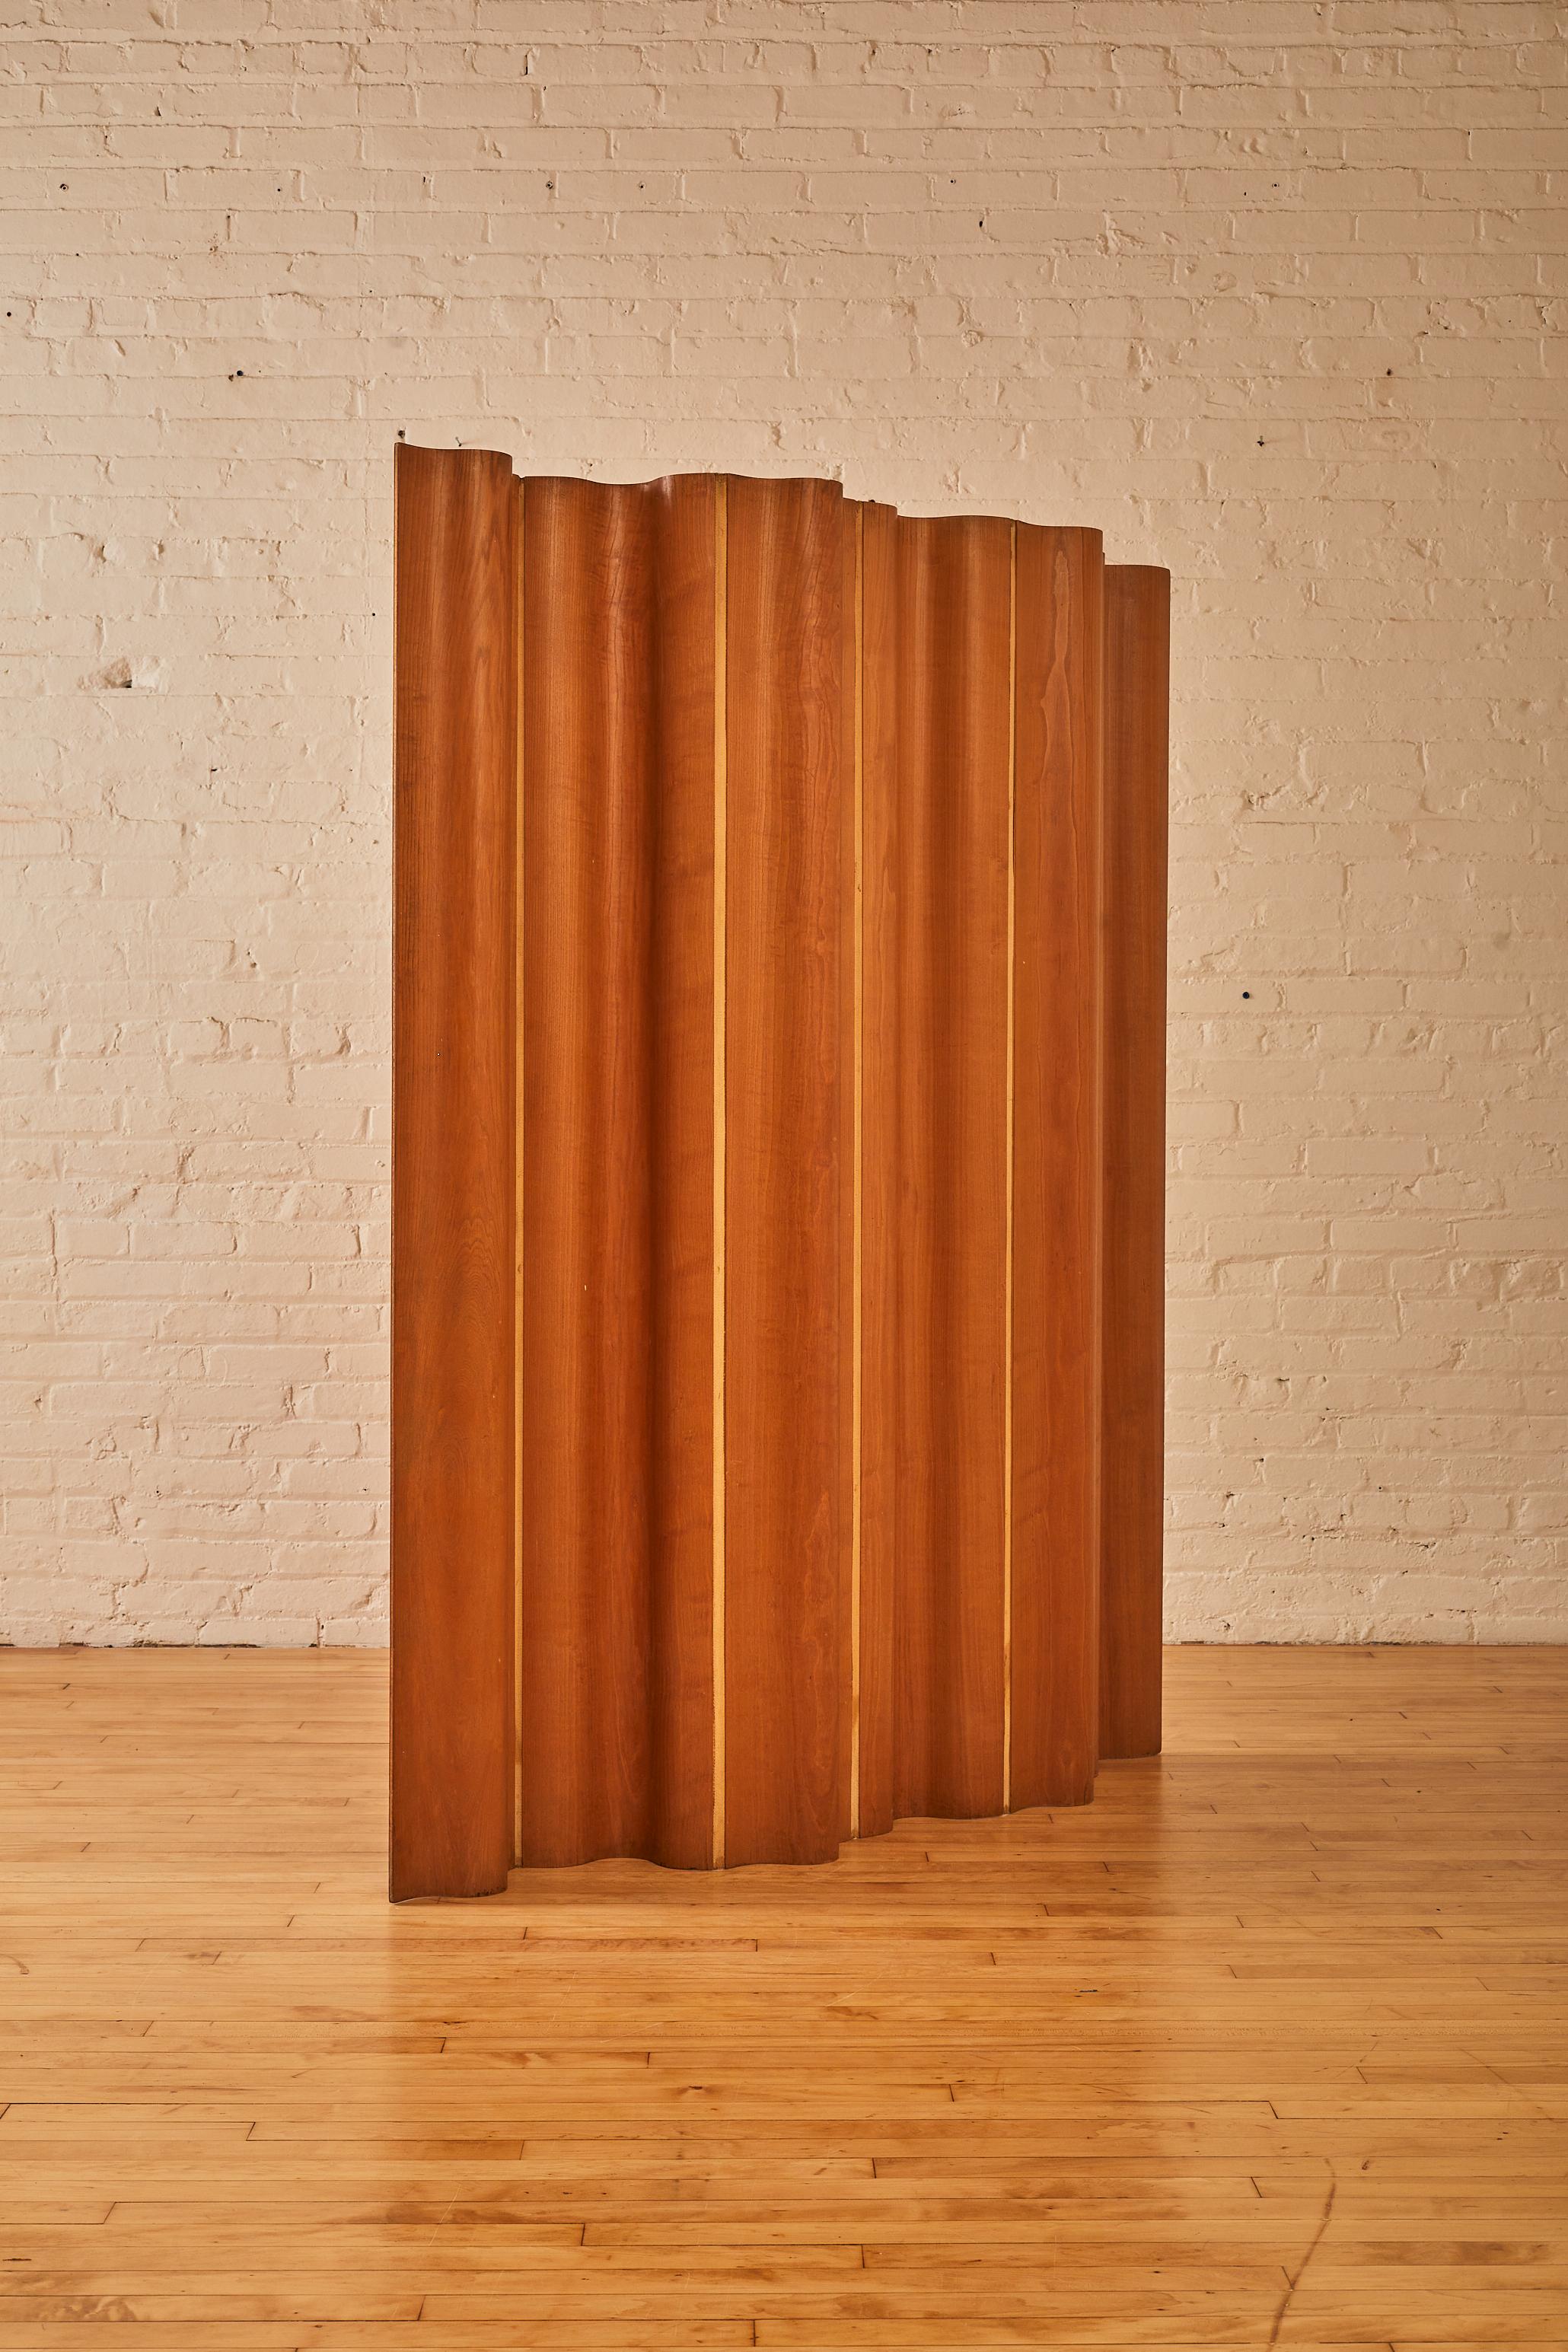 American Folding Screen by Charles & Ray Eames 'FSW-6'